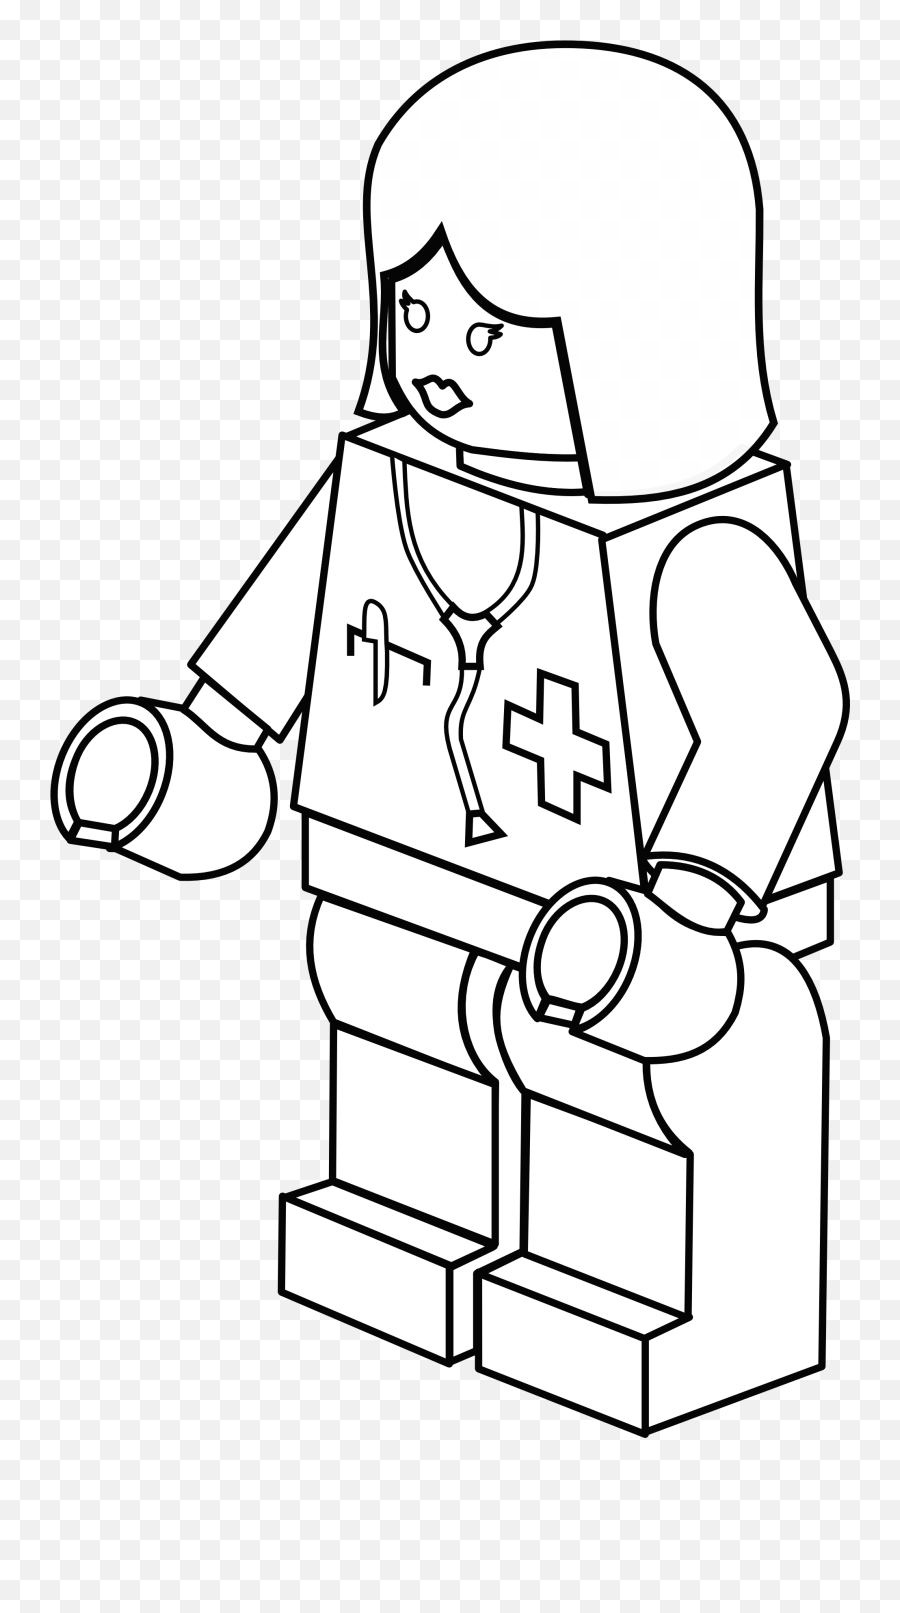 Free Lego Clipart - Lego Doctor Coloring Page Emoji,Lego Clipart